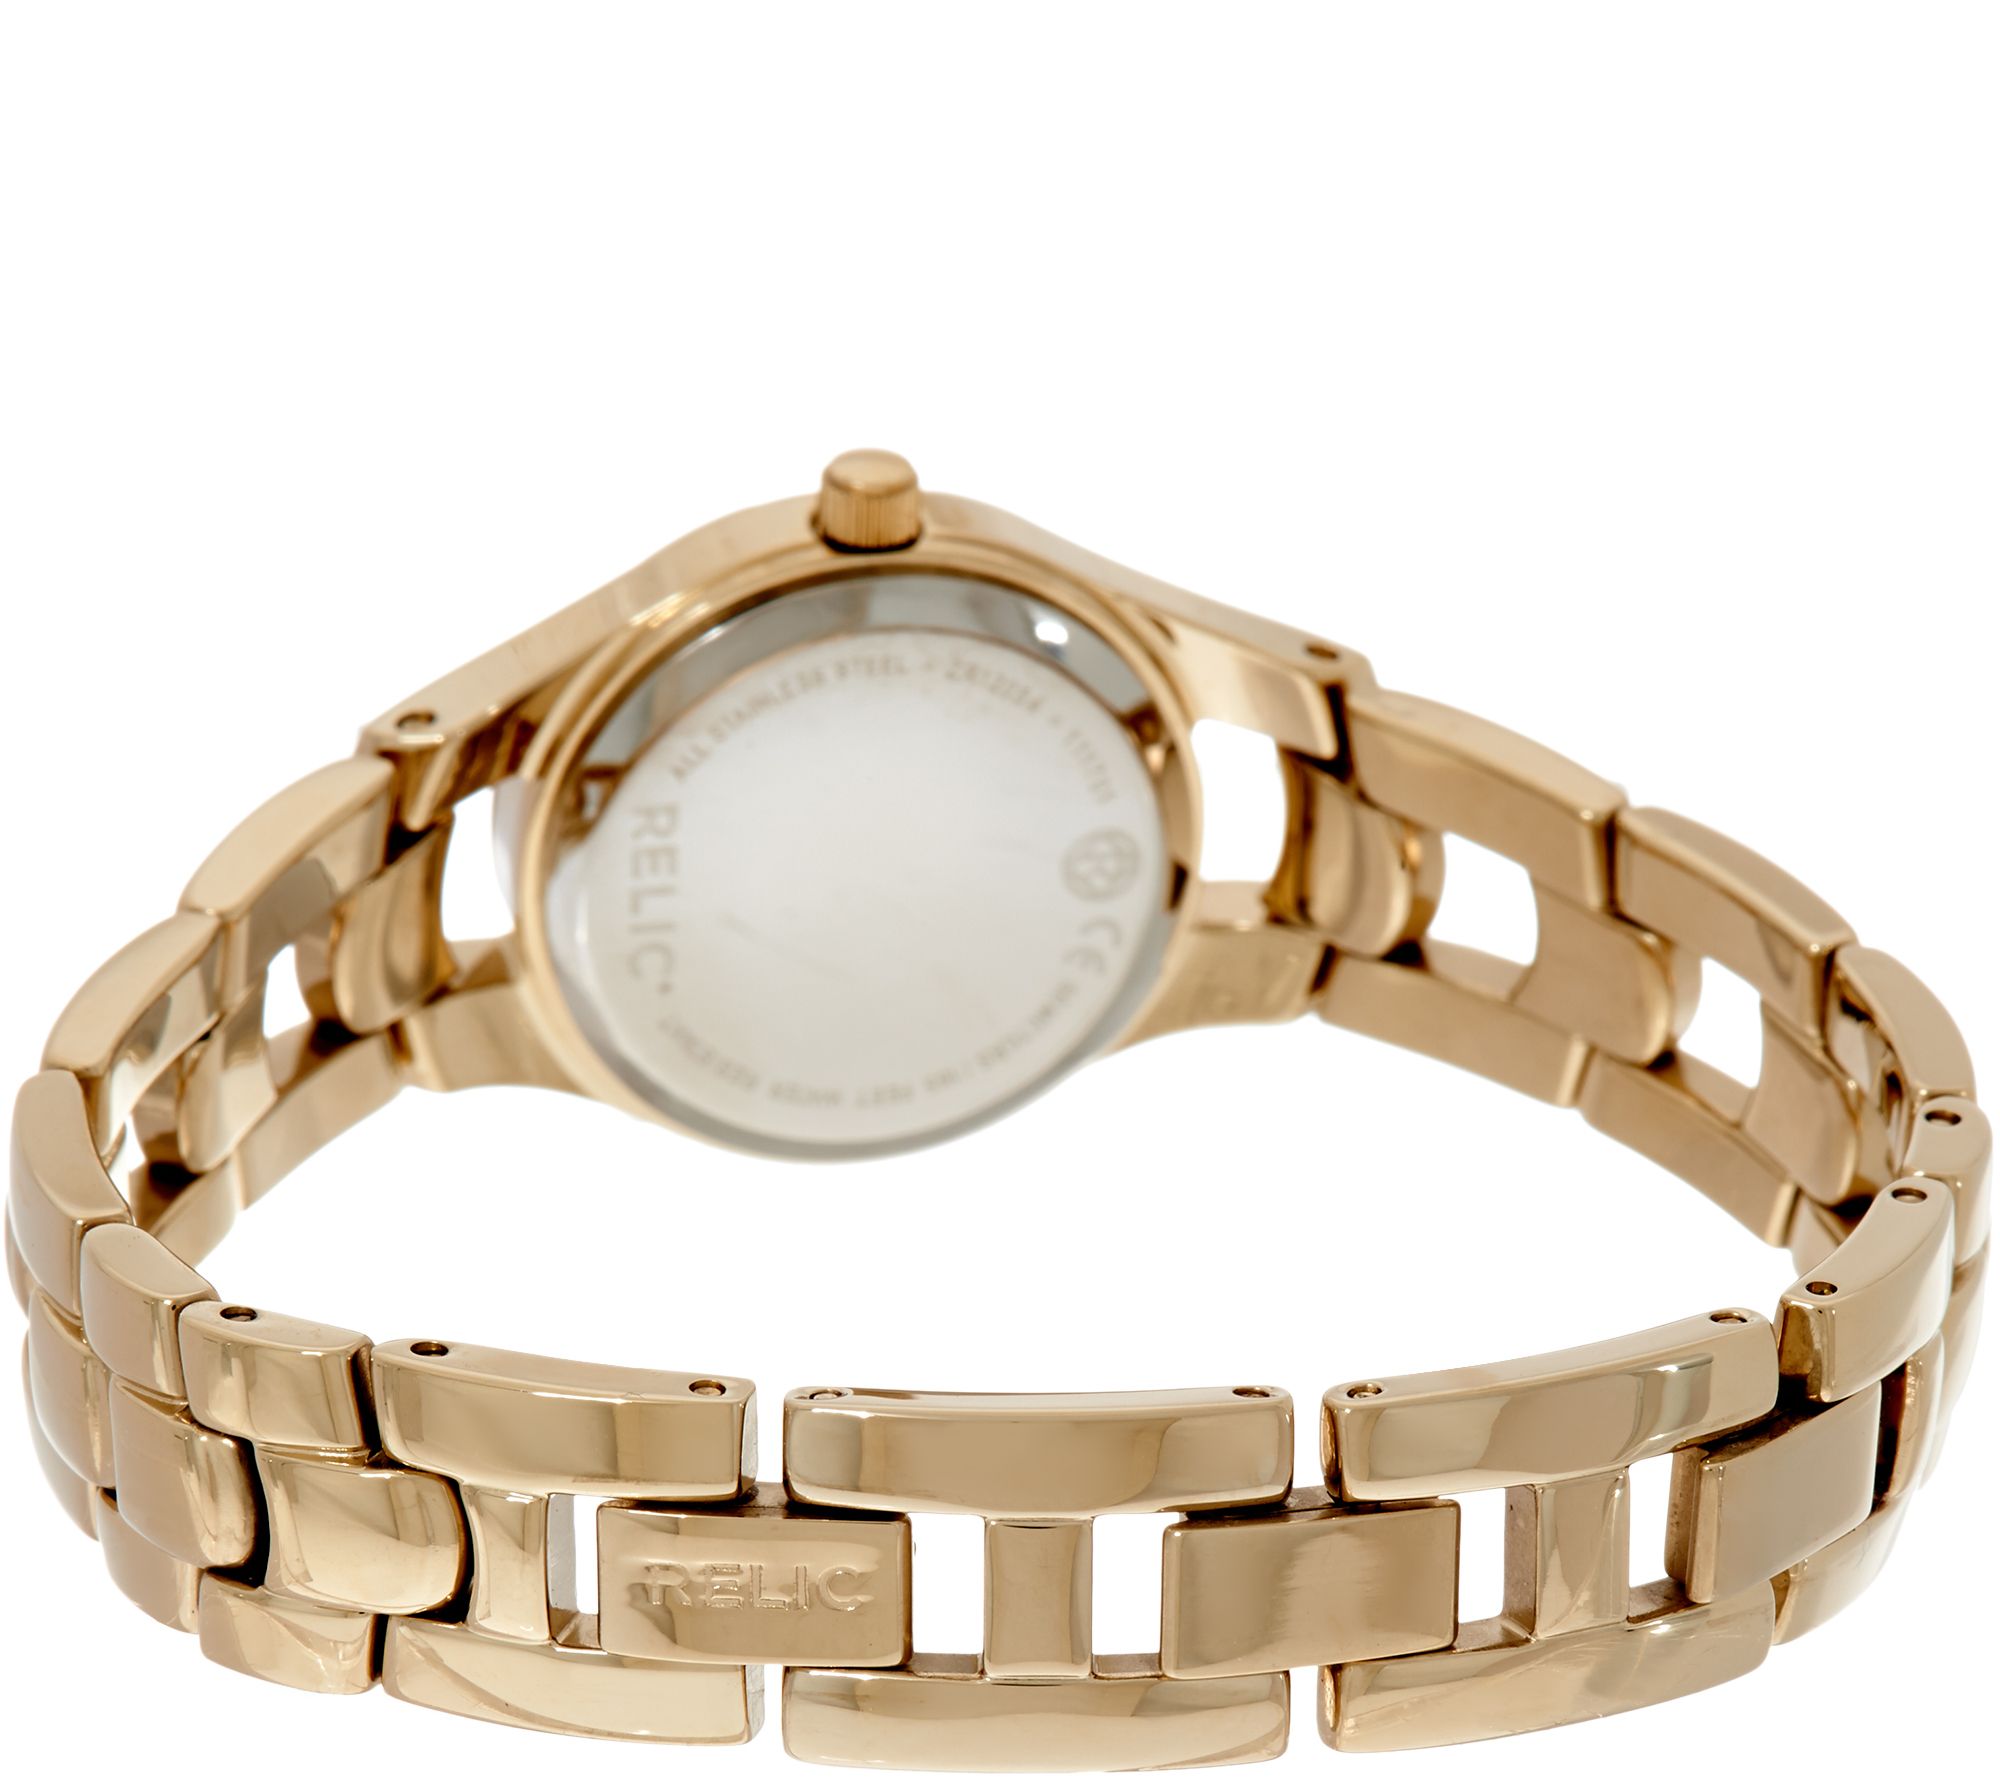 Relic Goldtone Stainless Steel Bracelet Watch - Charlotte - QVC.com